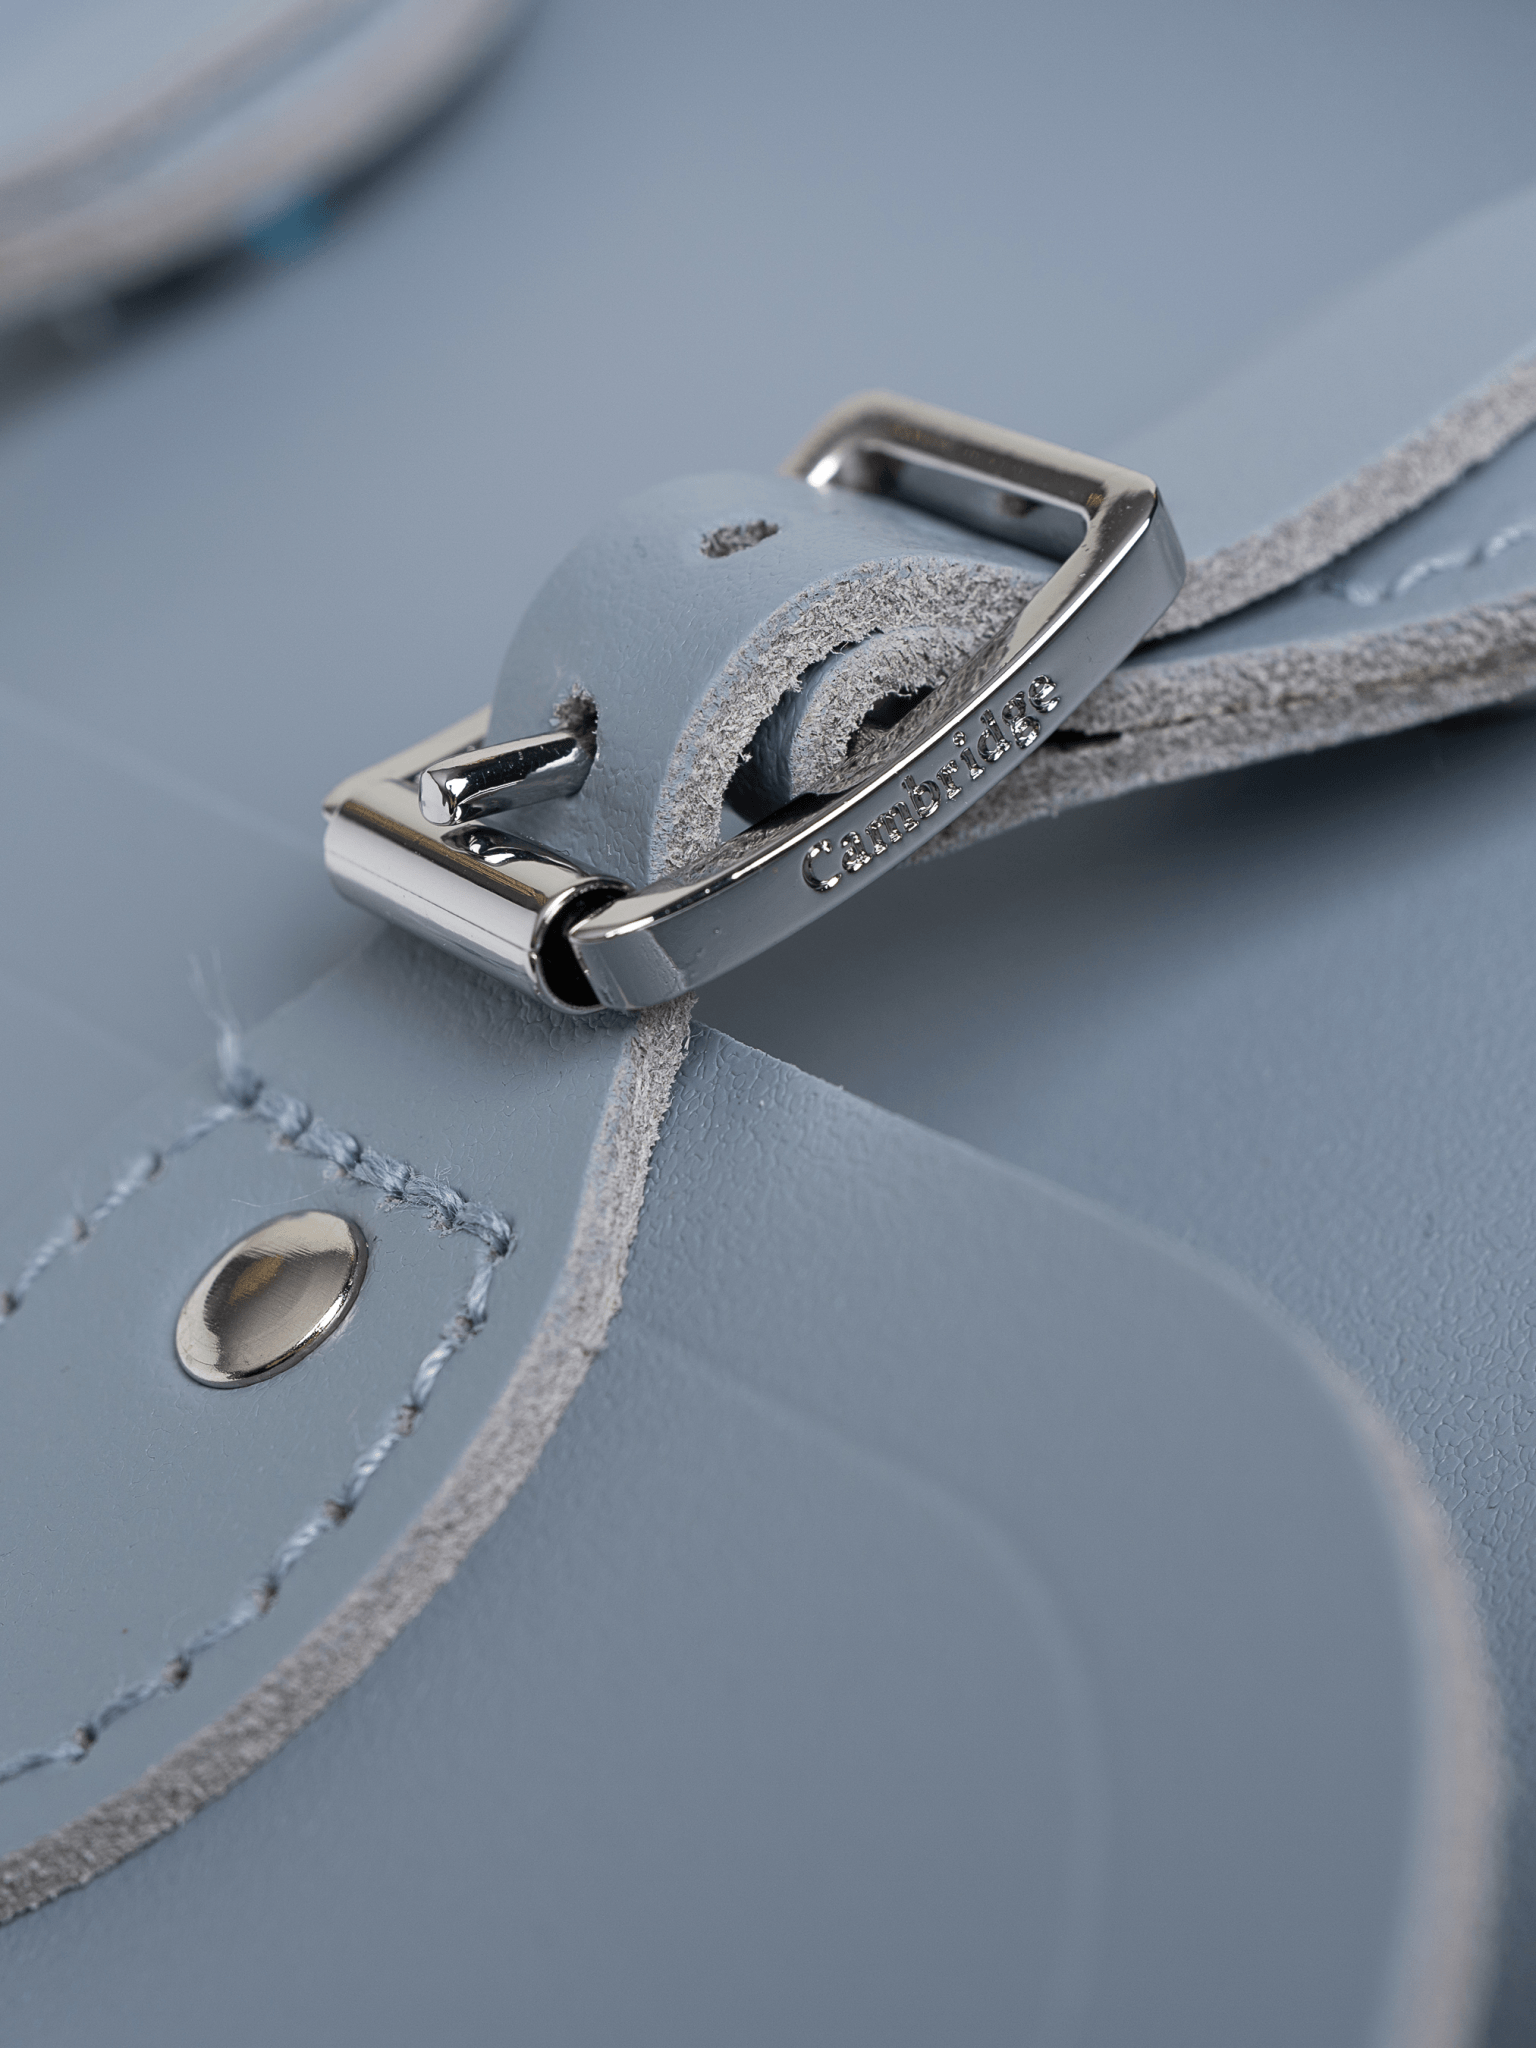 The Little One - French Grey - Cambridge Satchel